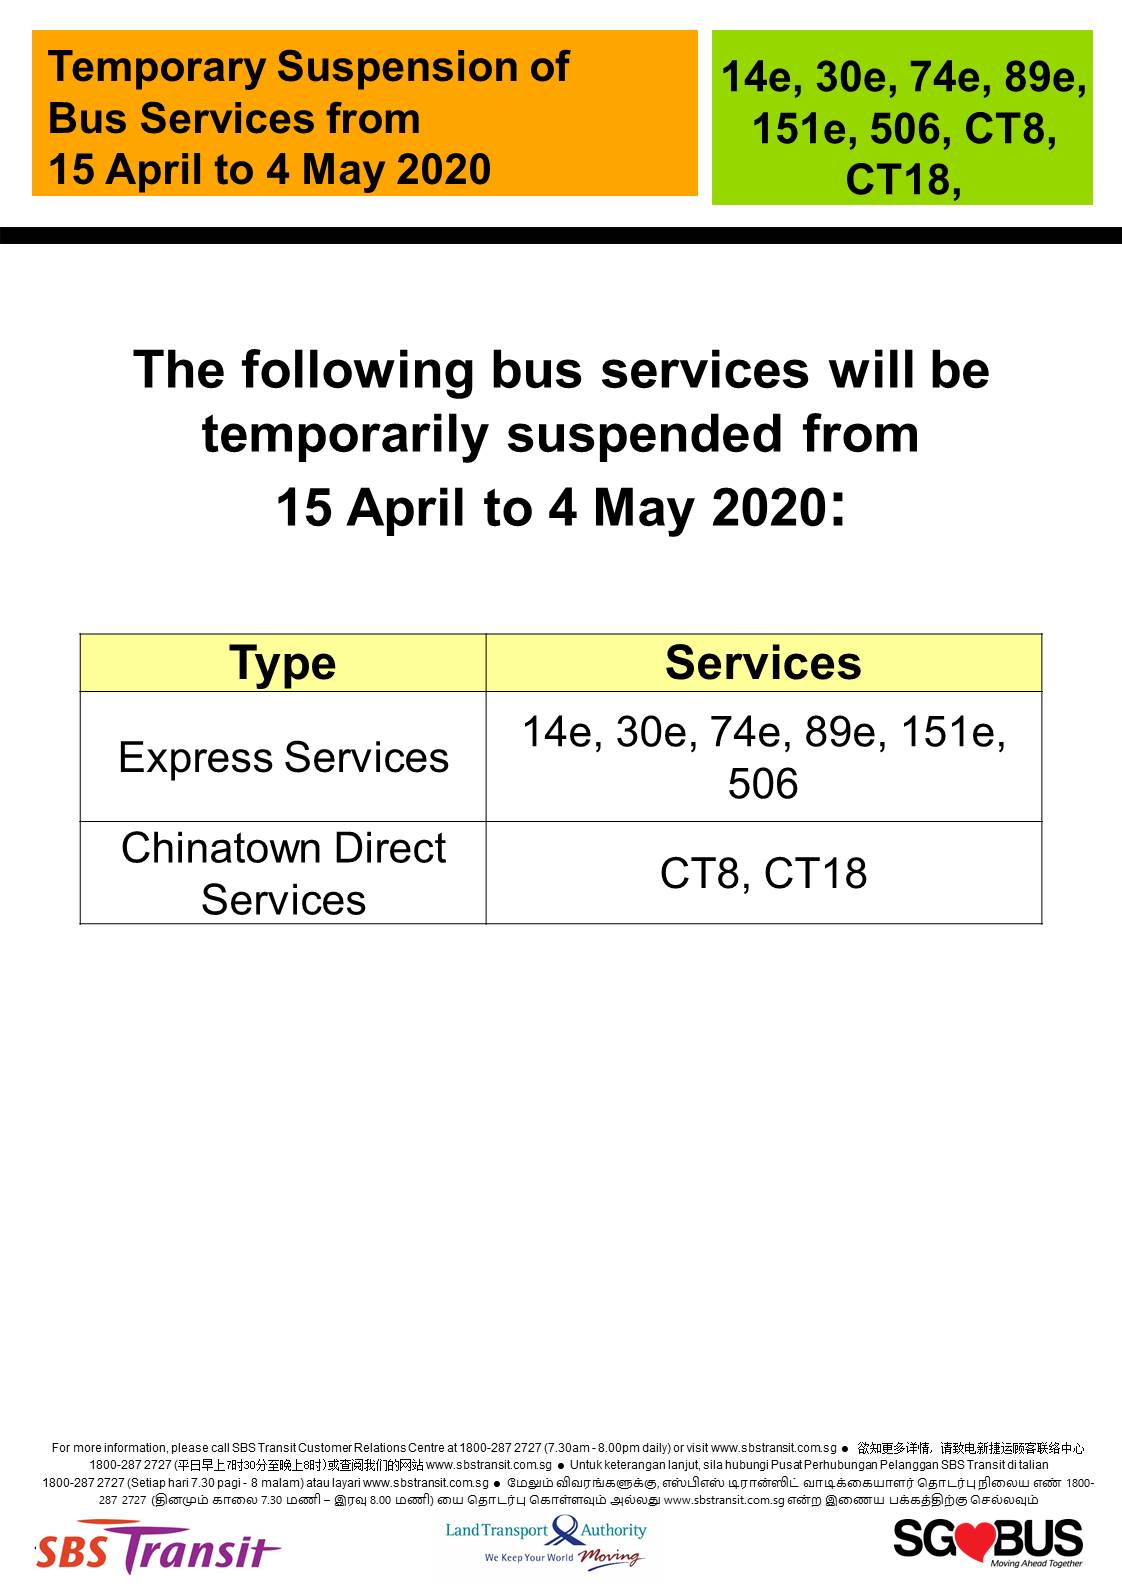 Official announcement from SBS Transit on temporary bus service suspension during COVID-19 Circuit Breaker measures 15 April 2020.